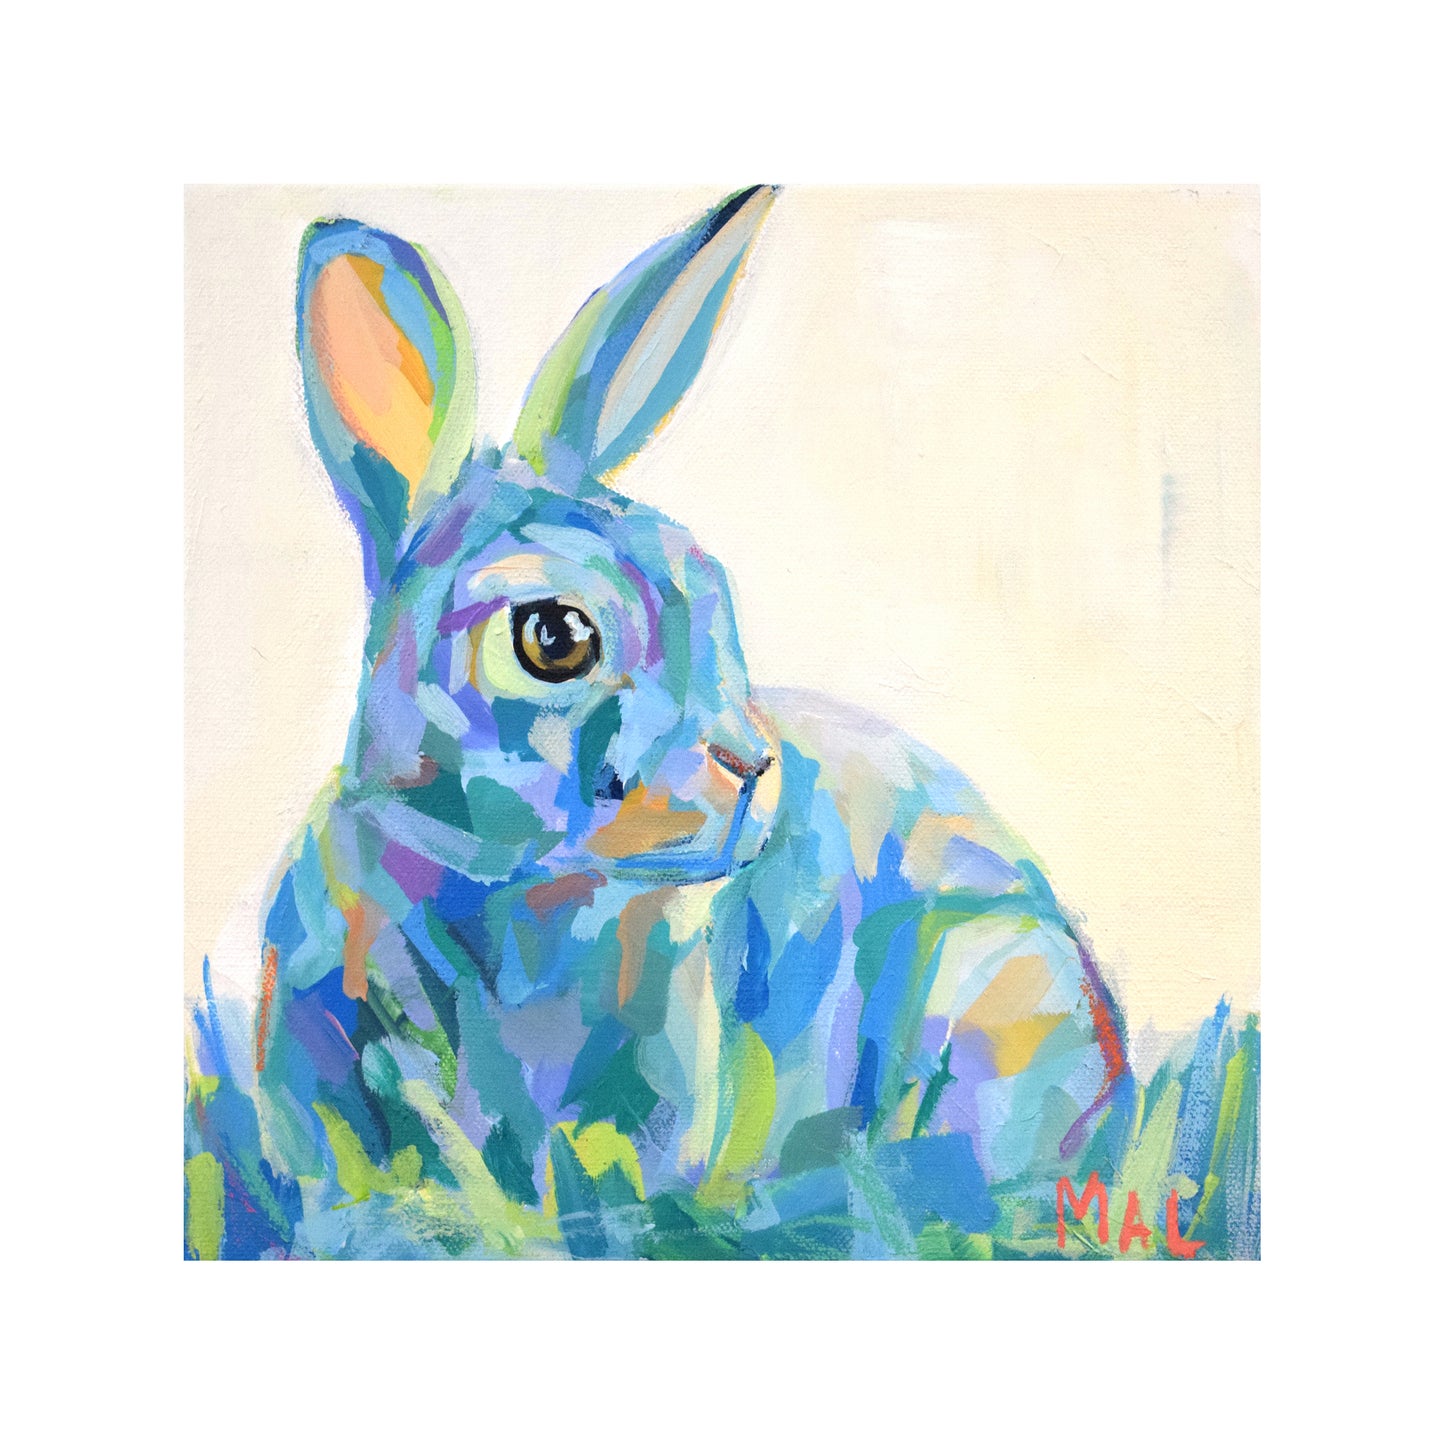 "Bunny 3" Print by Mallory Moye - 8 x 8 inches by Mallory Moye - K. A. Artist Shop